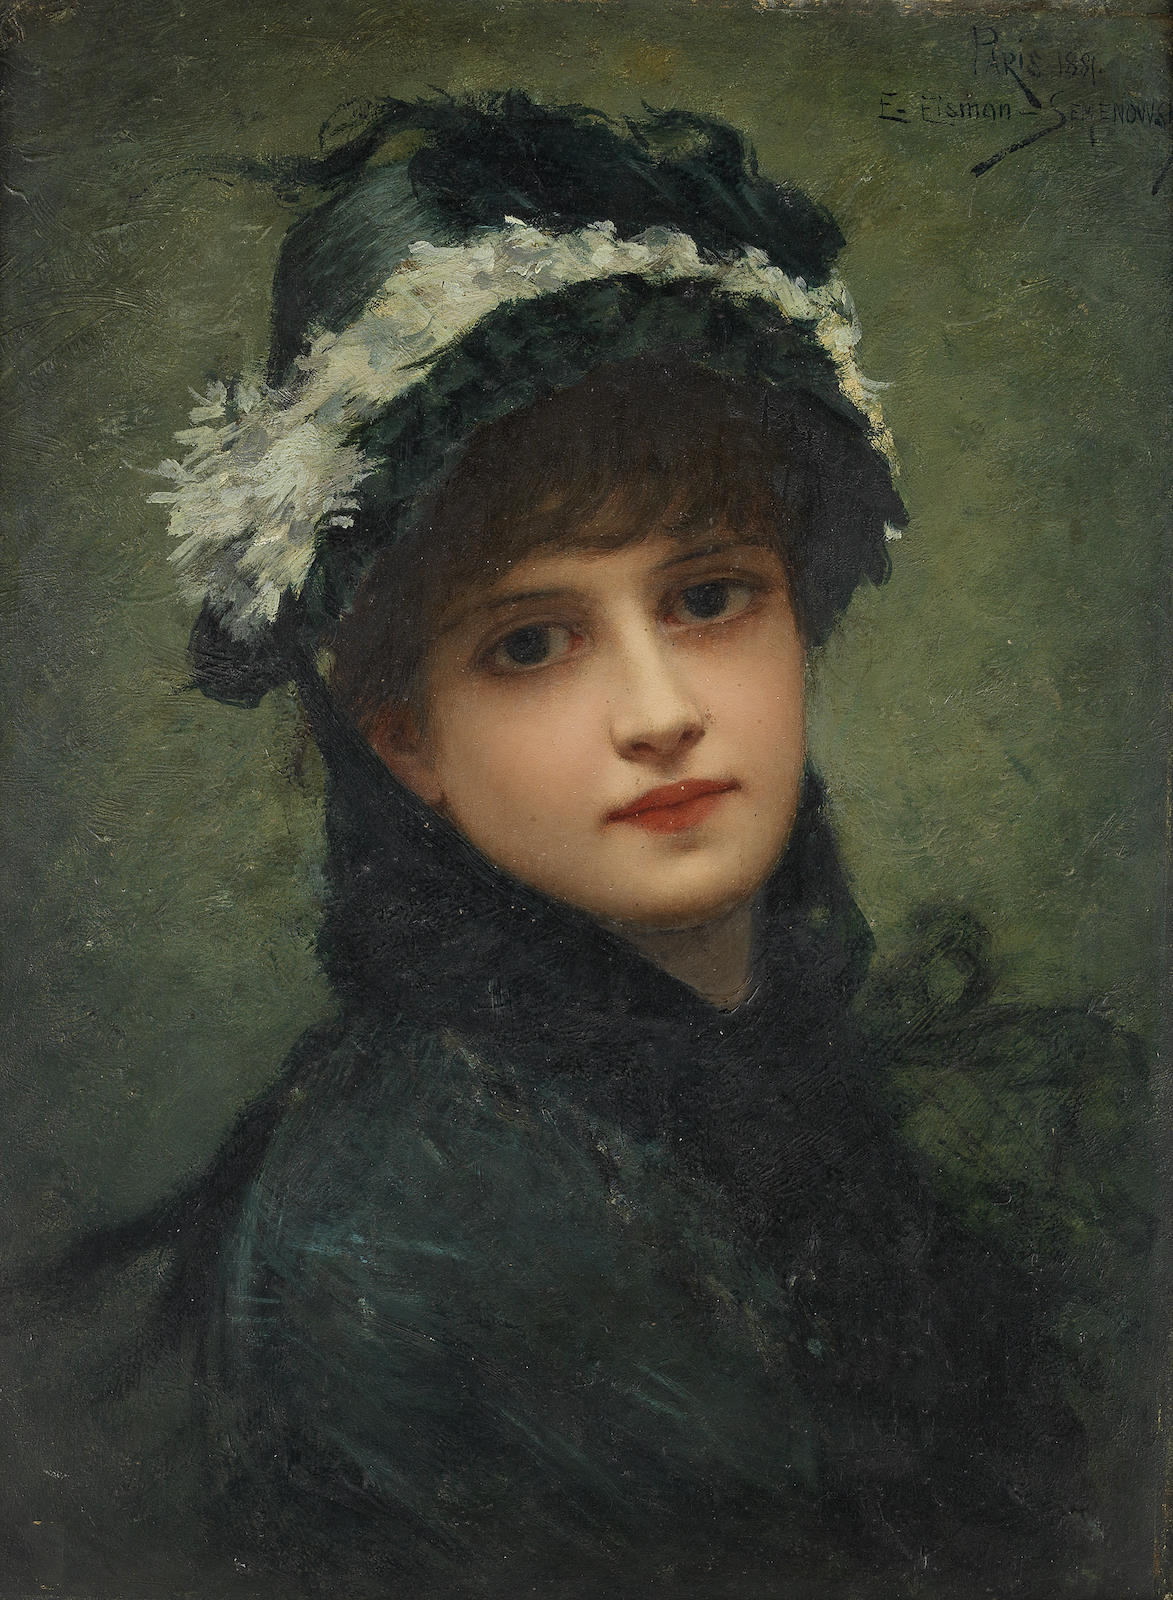 Portrait of a Lady in Green